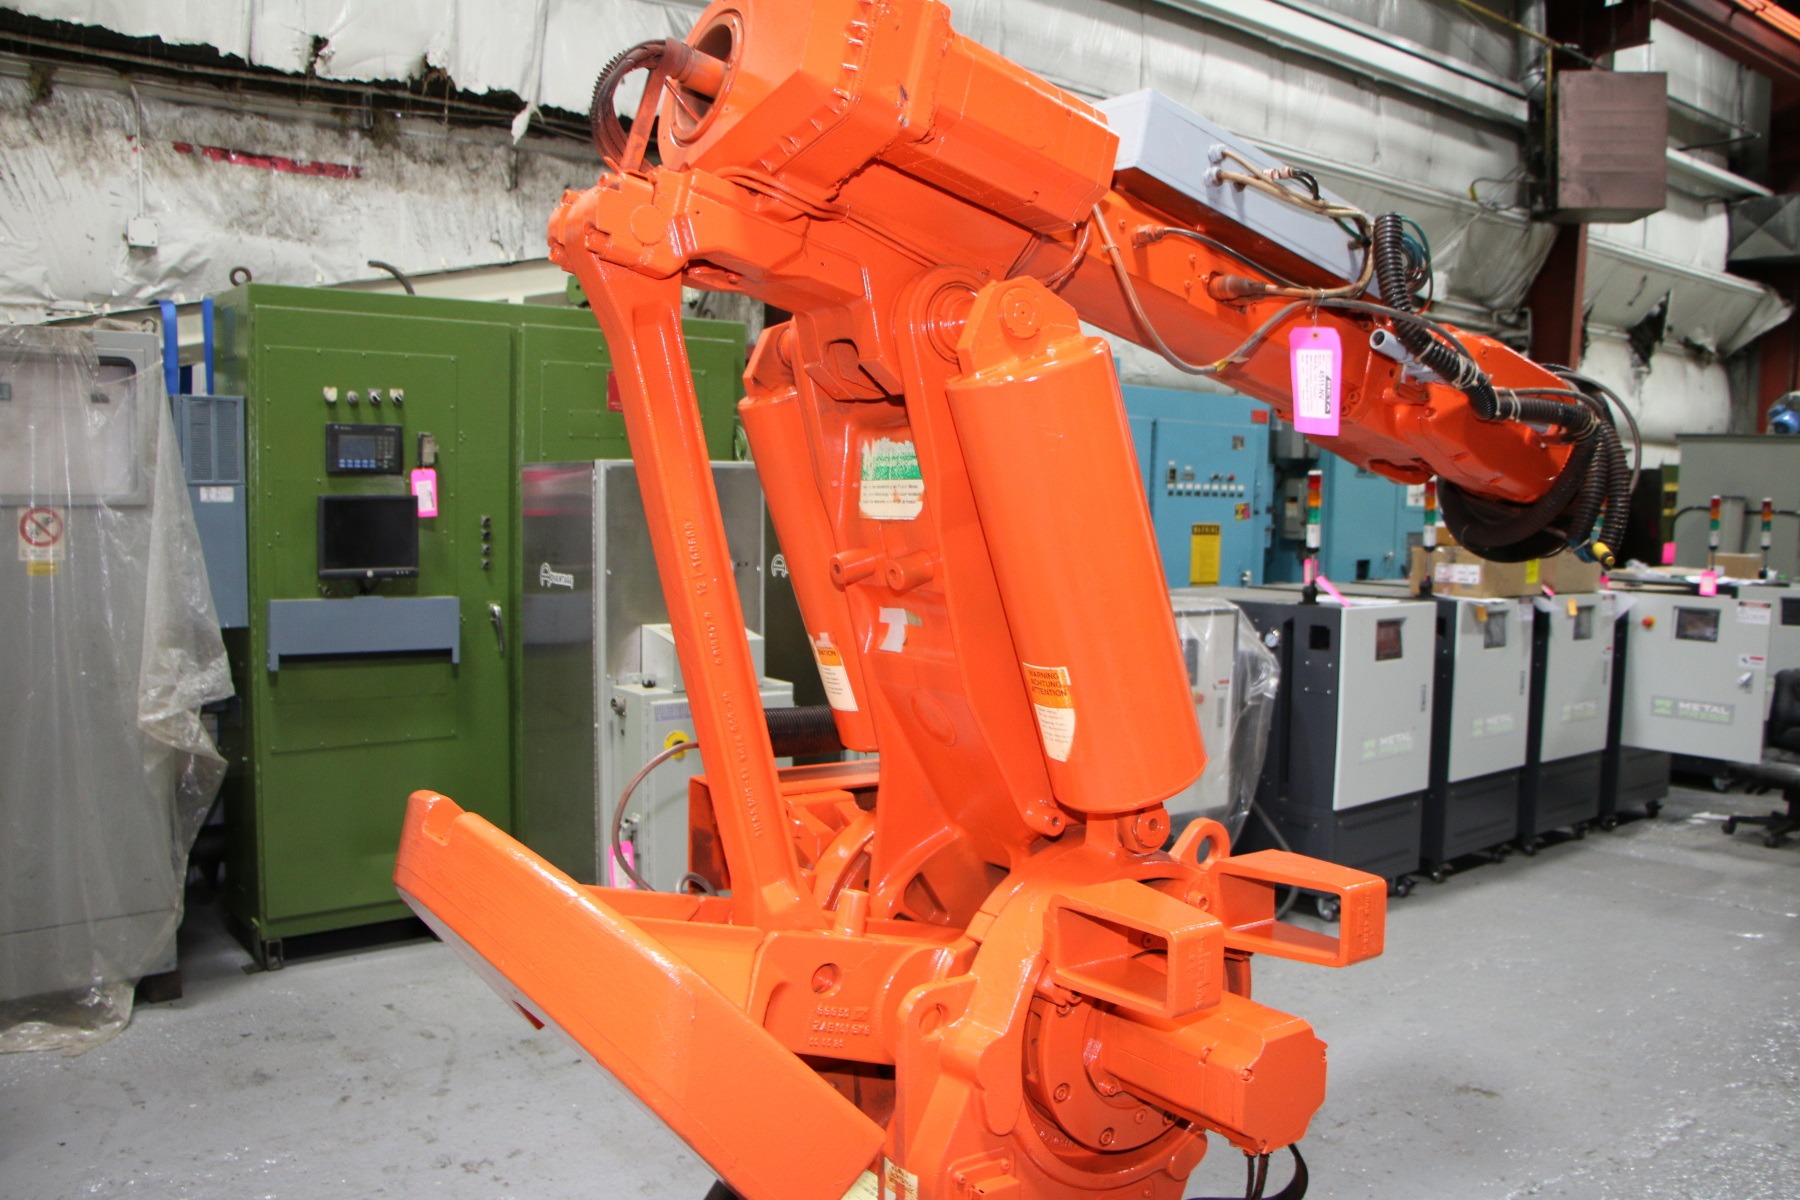 Detailed Picture of Used ABB Foundry Industrial Robot